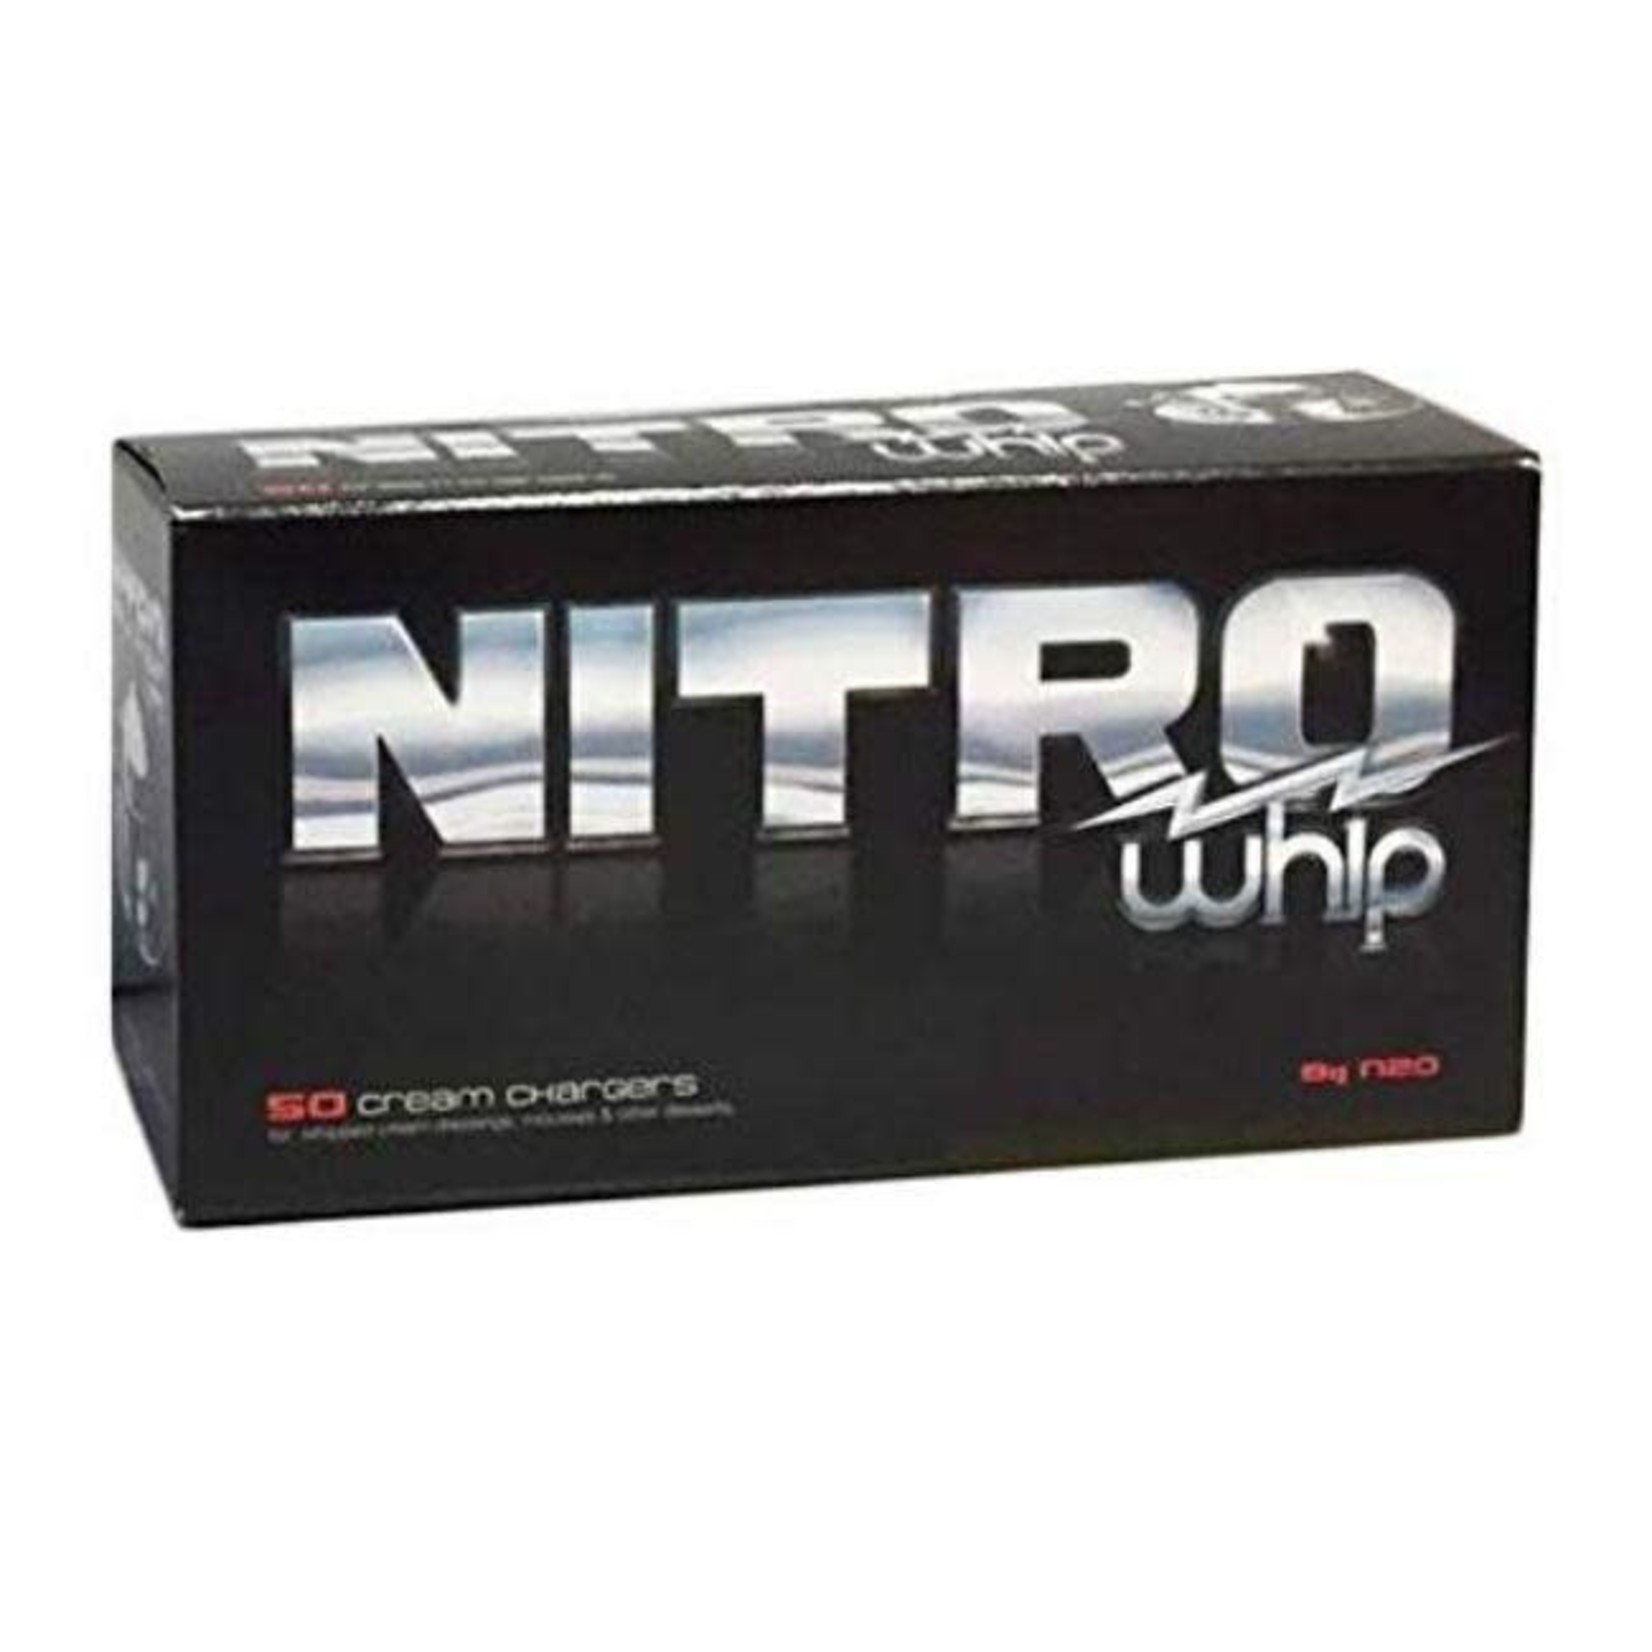 Yocan Nitro Whip Cream Chargers